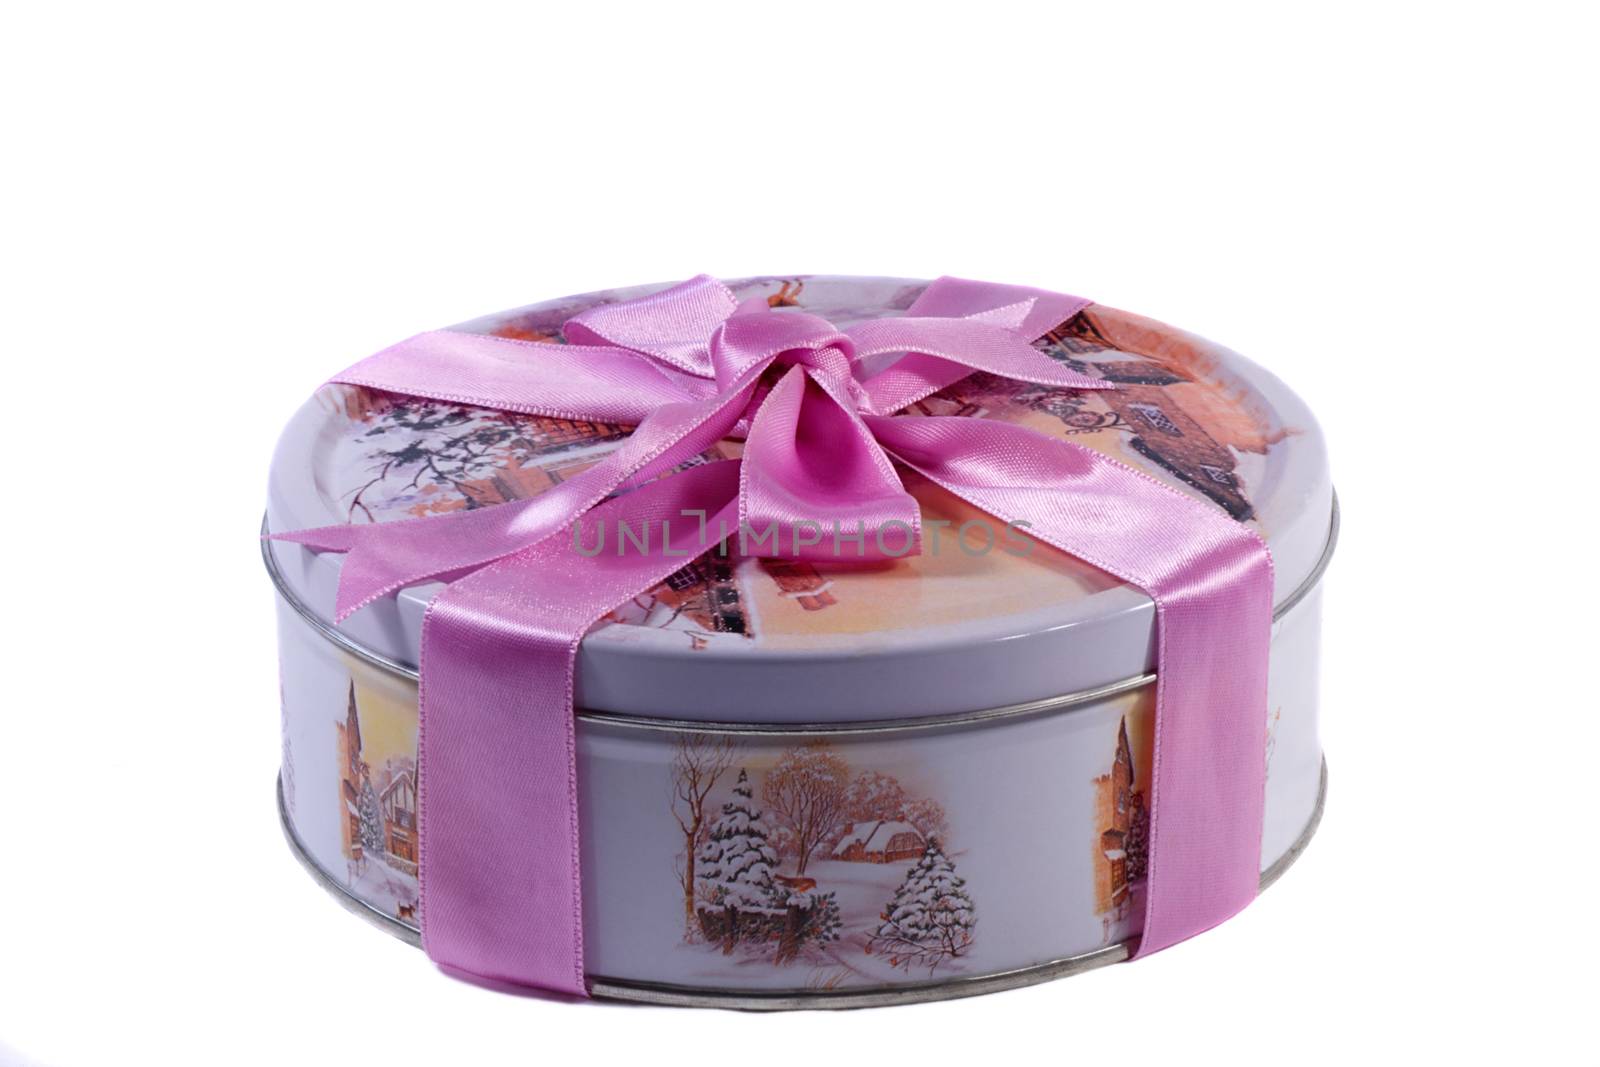 Beautifully painted and decorated with a ribbon box with a present. Presents on a white background.